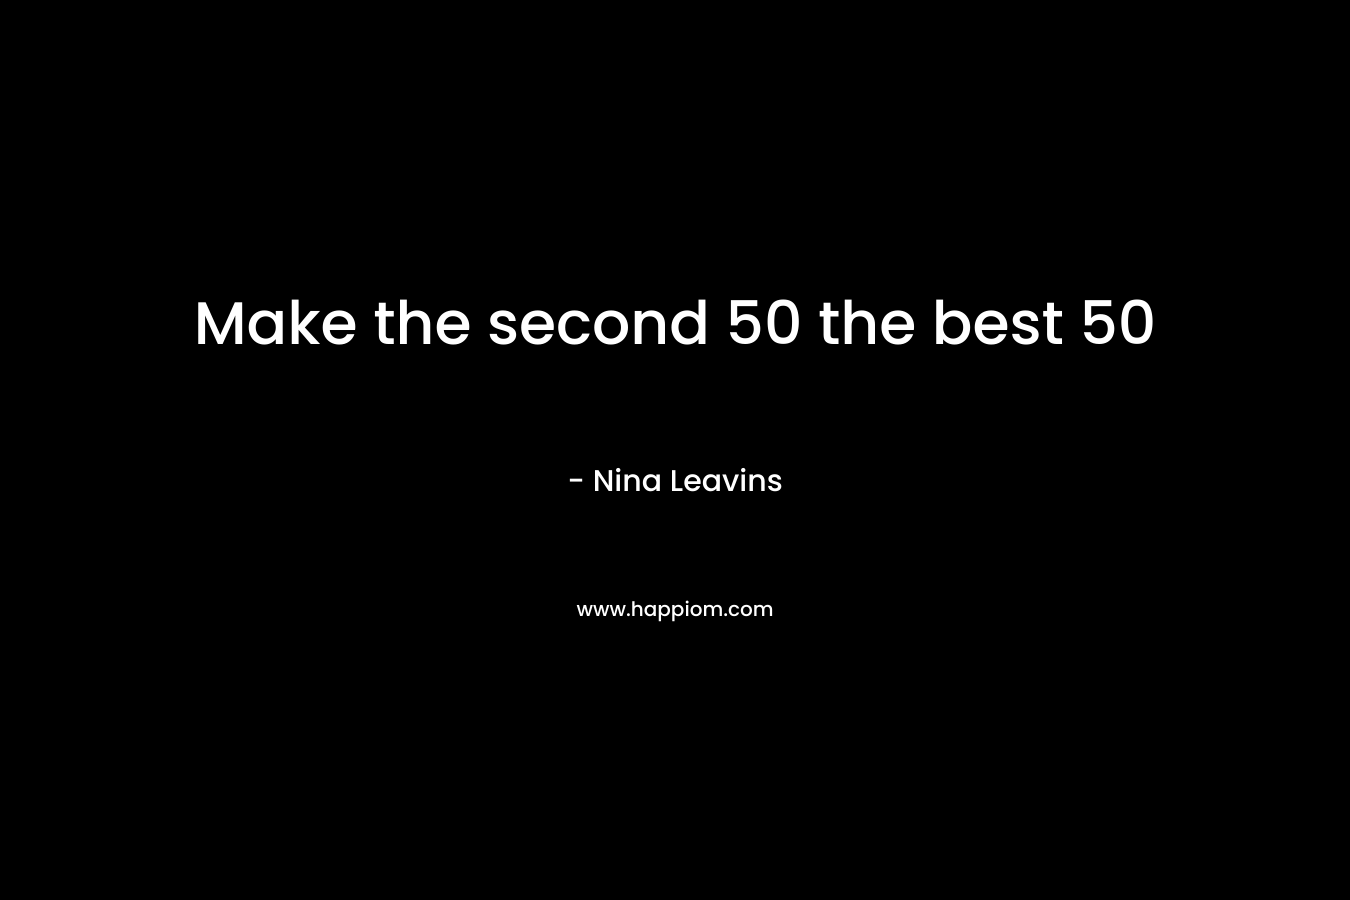 Make the second 50 the best 50